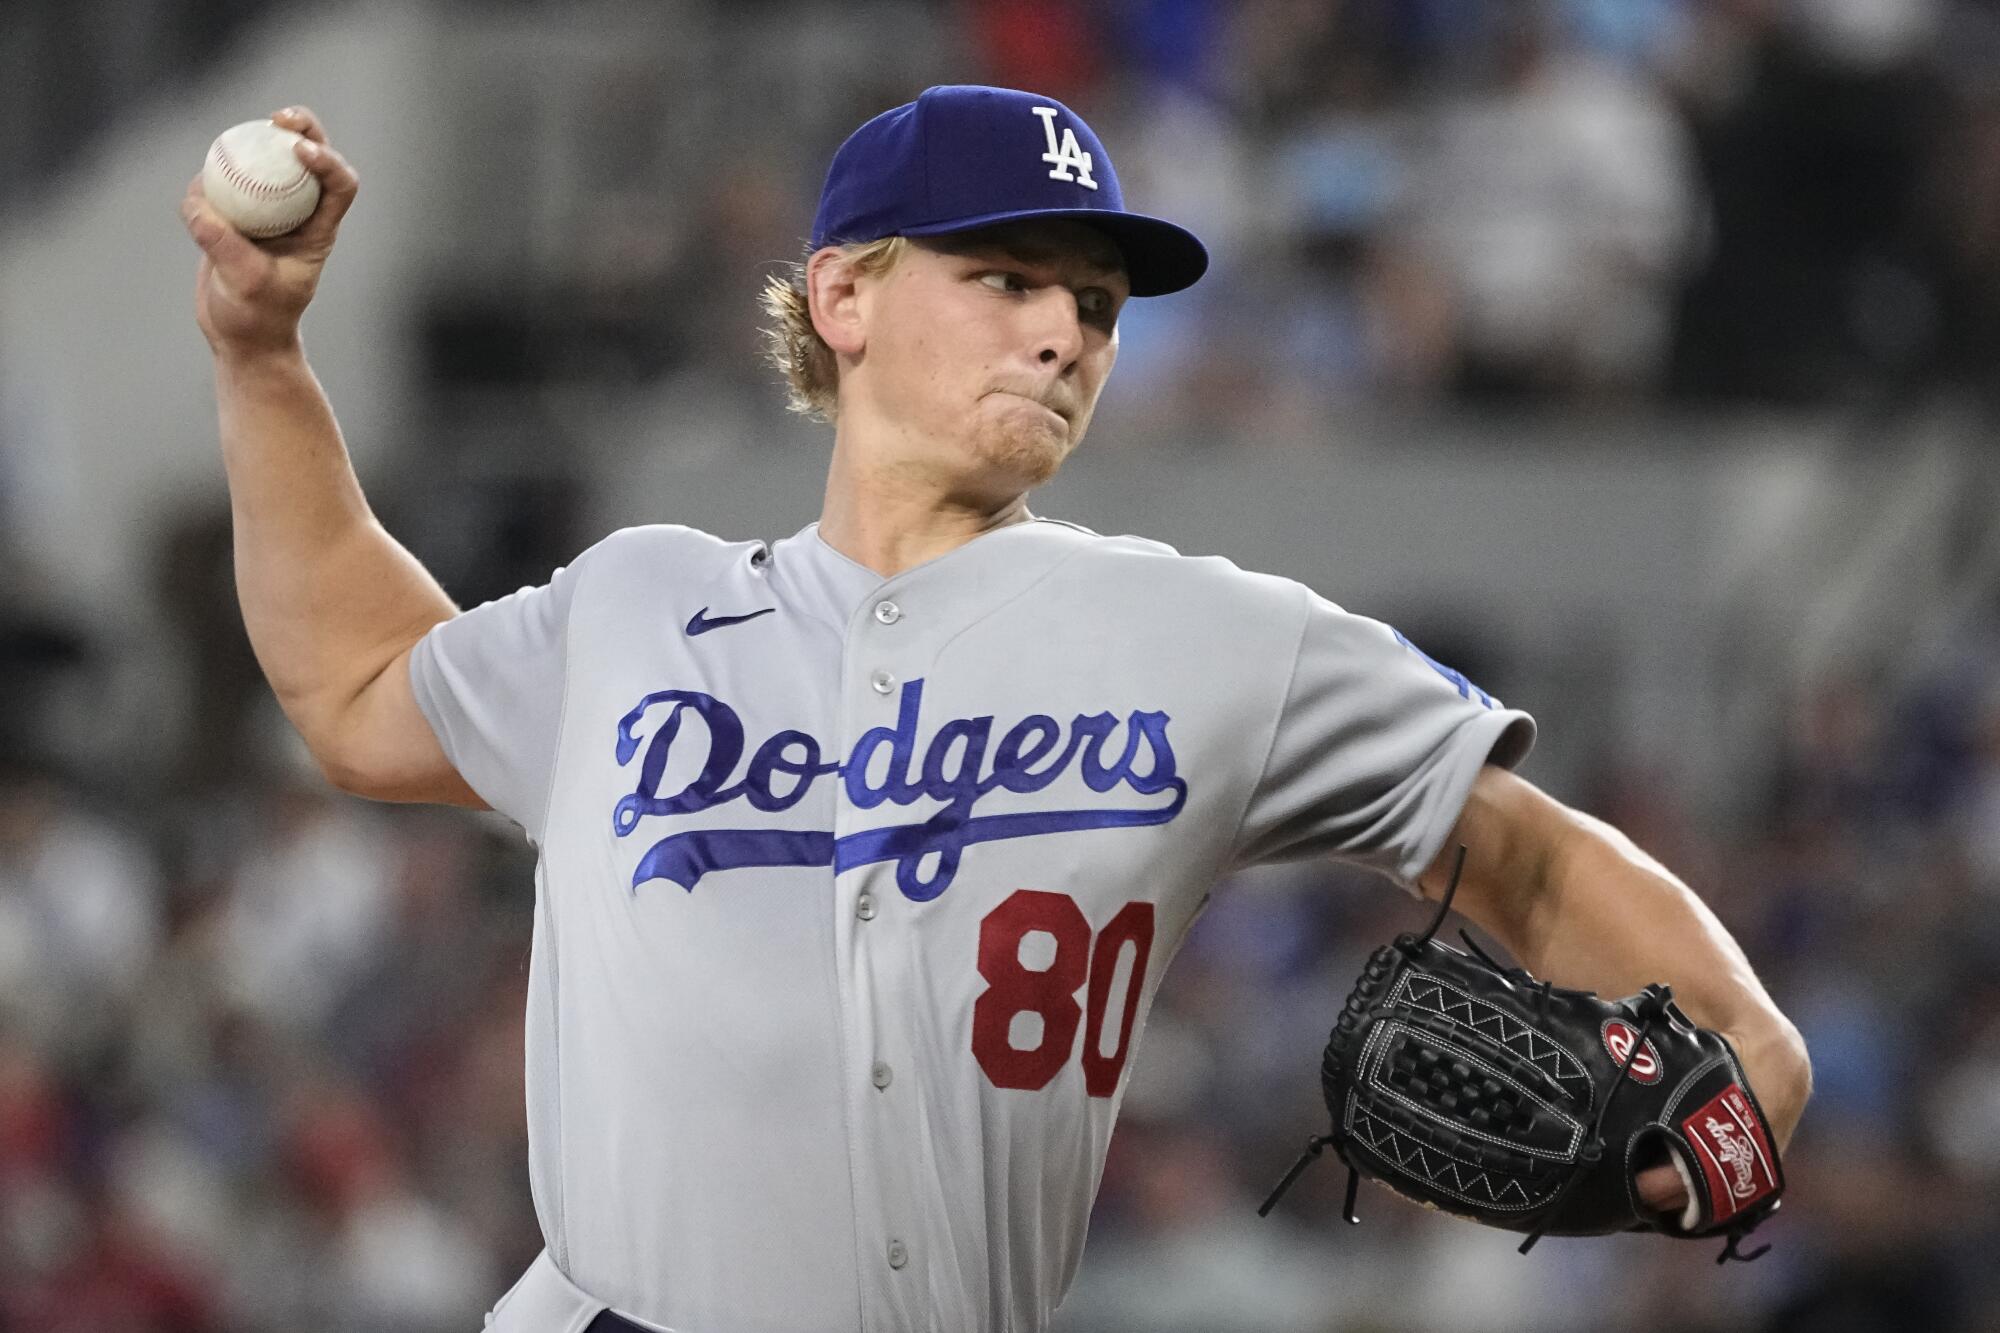 Dodgers' double-A rotation is epitome of their pitching pipeline